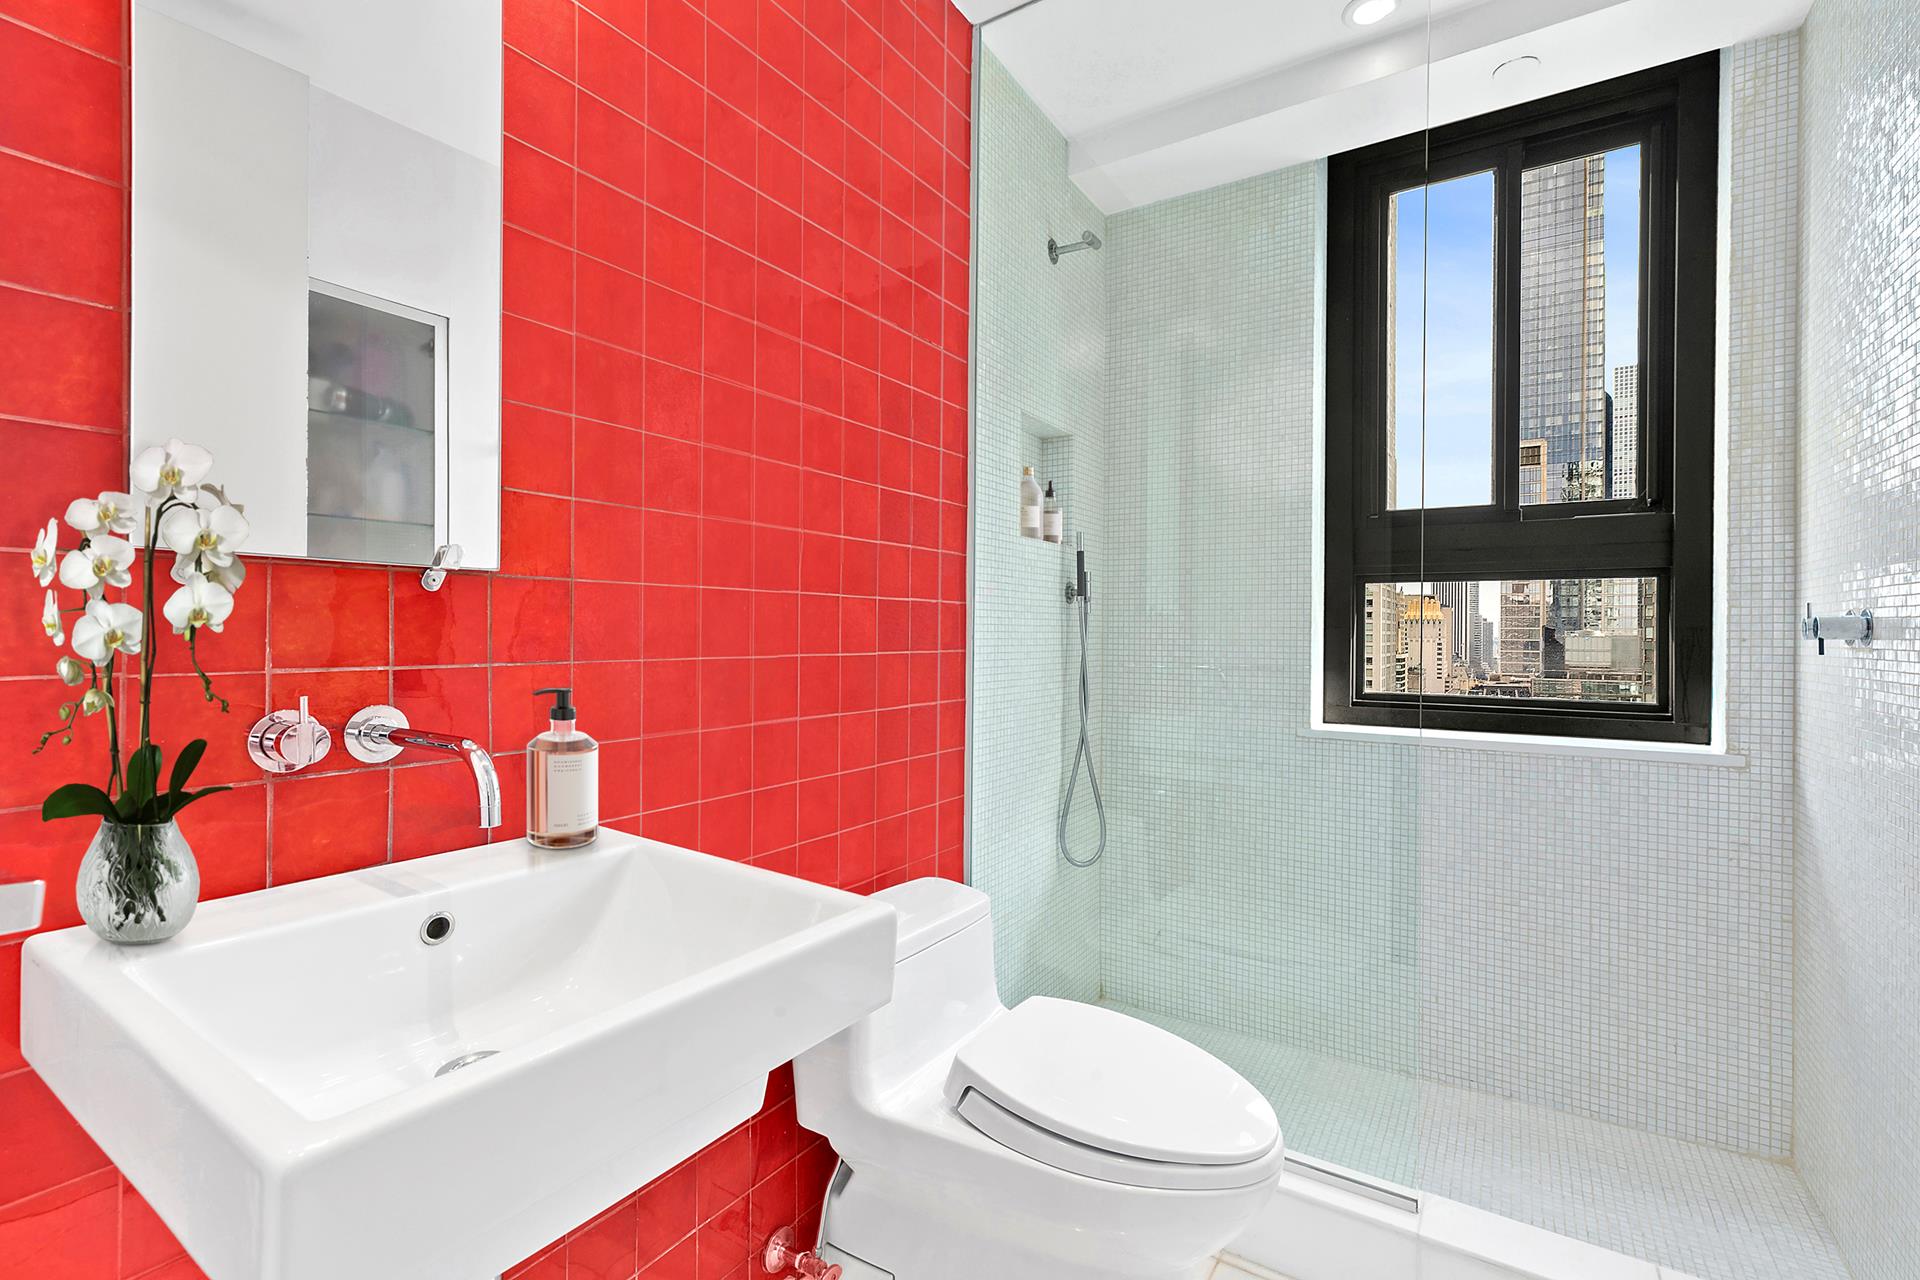 347 West 57th Street, New York City NY 10019 A.N Shell Realty